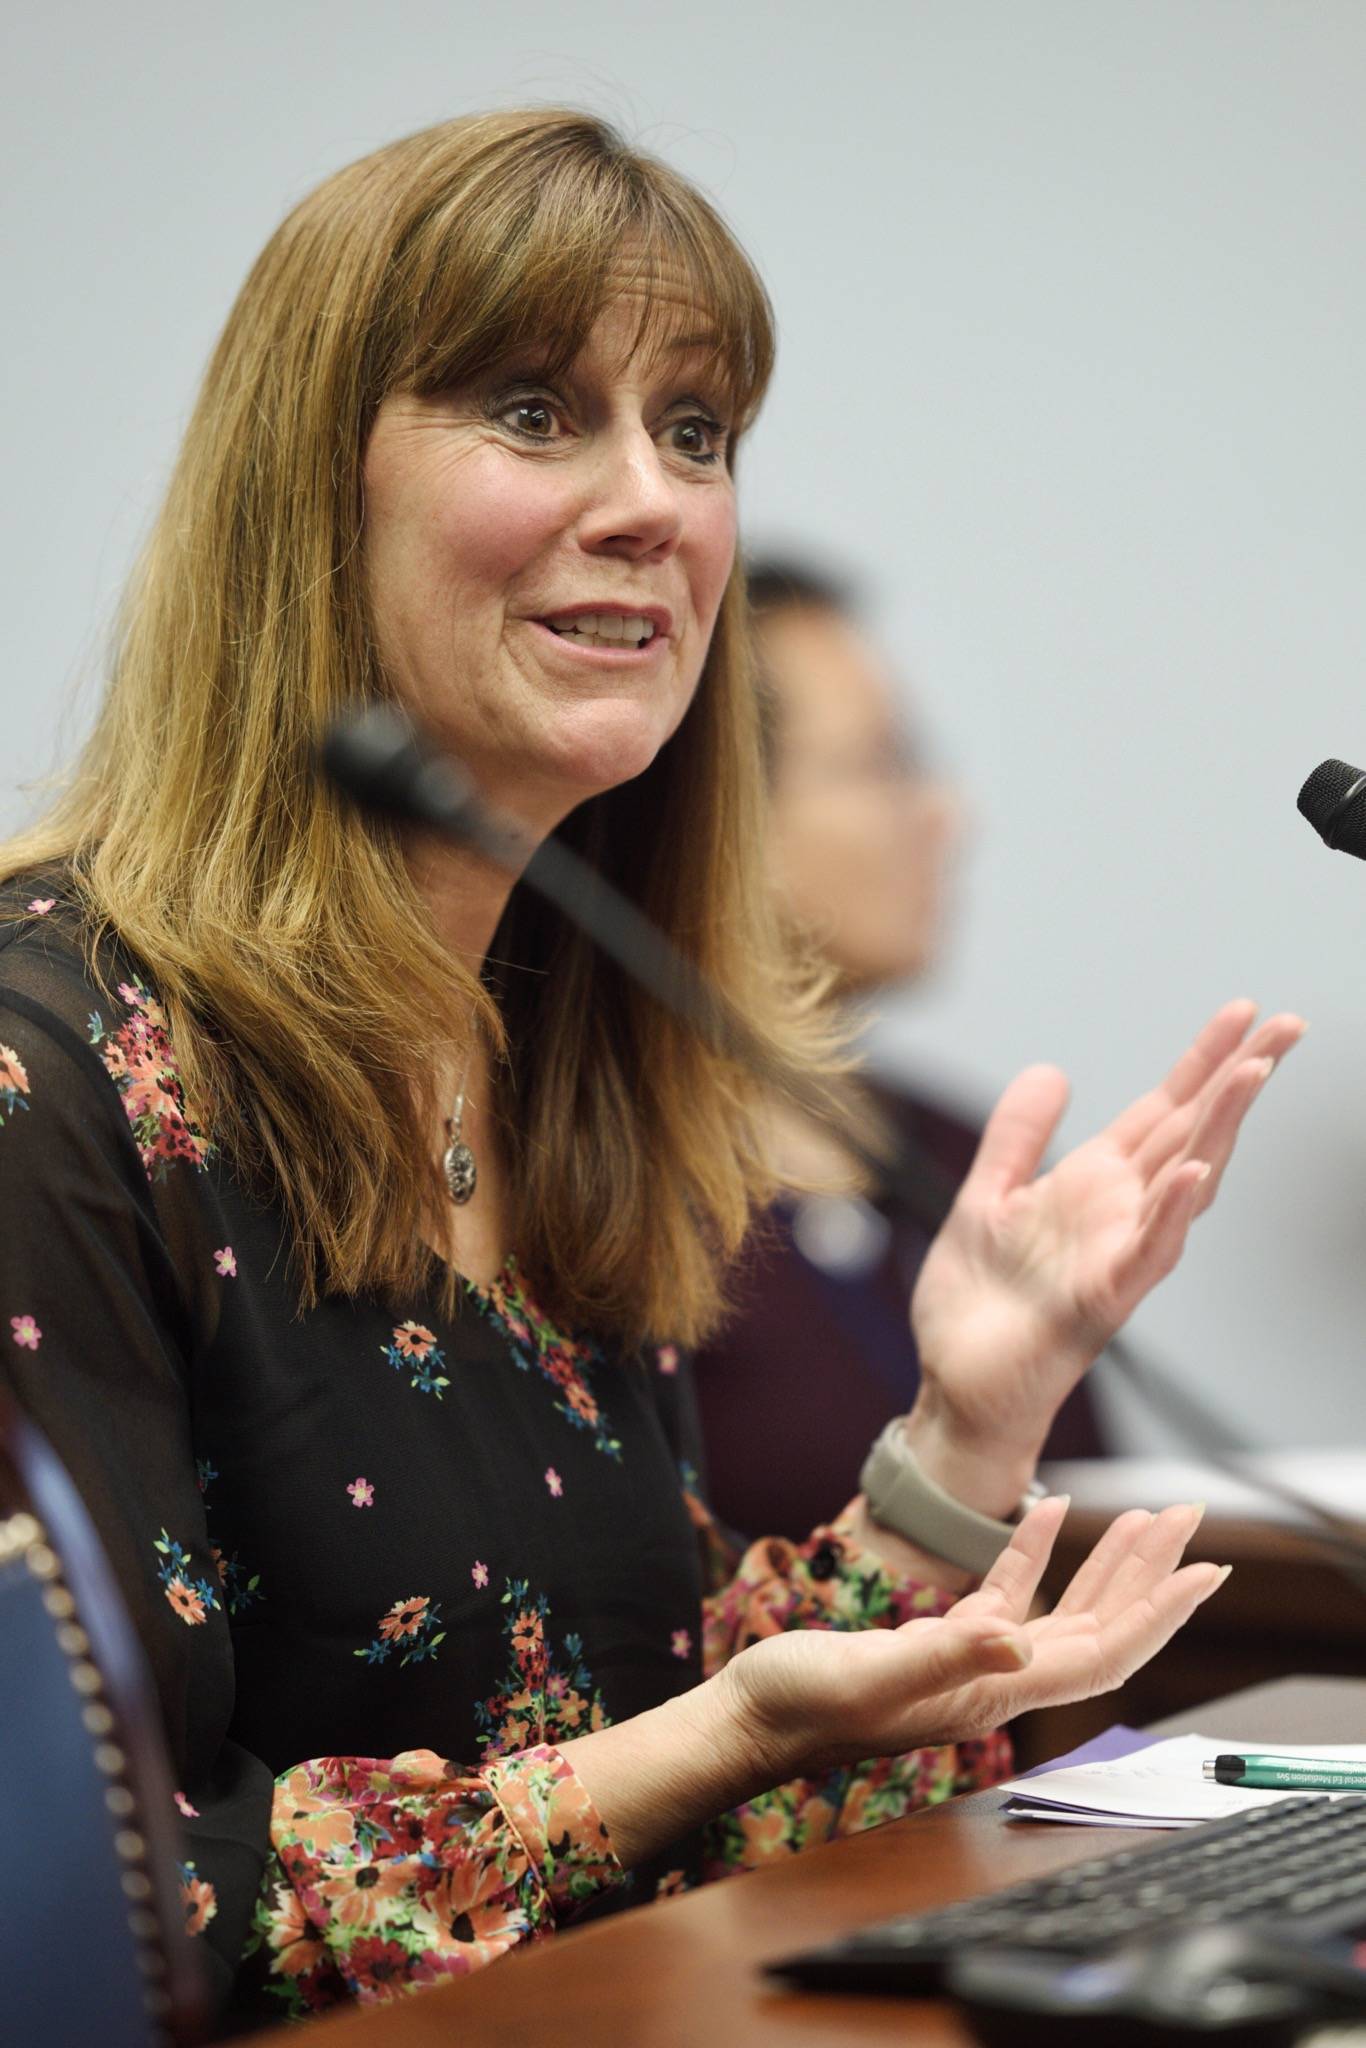 Bridget Weiss, Superintendent of the Juneau School District, spoke in favor of SB 6 in front of the Senate Education Committee at the Capitol on Tuesday, April 16, 2019. The bill is to provide money for prekindergarten education. (Michael Penn | Juneau Empire)